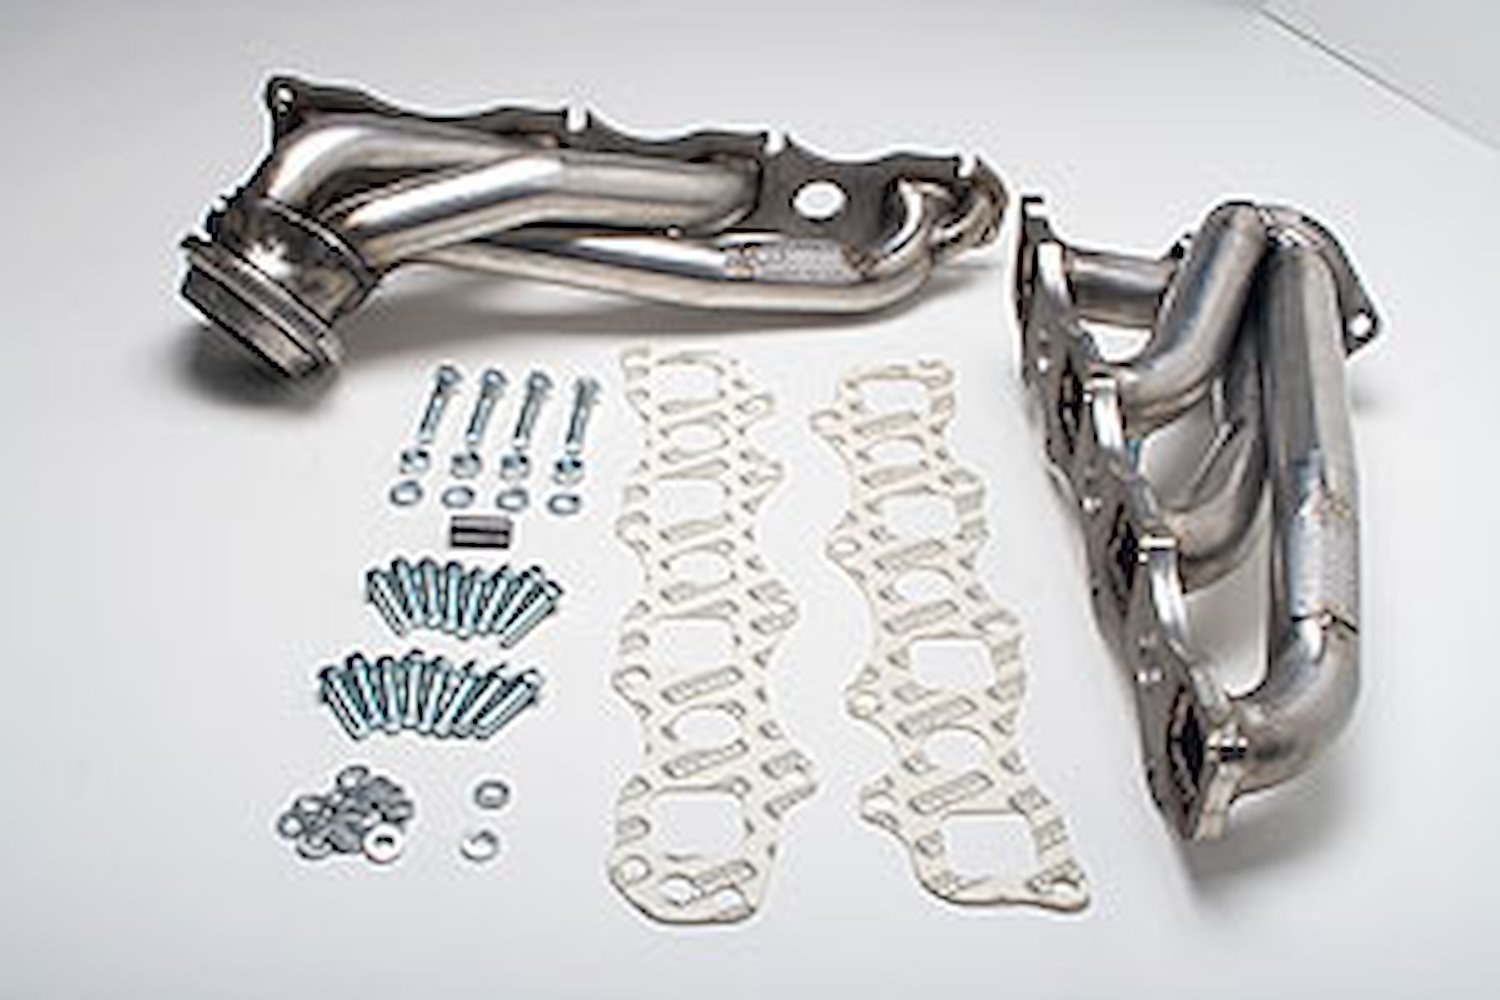 Stainless Steel Headers 2005-12 Charger 5.7L HEMI